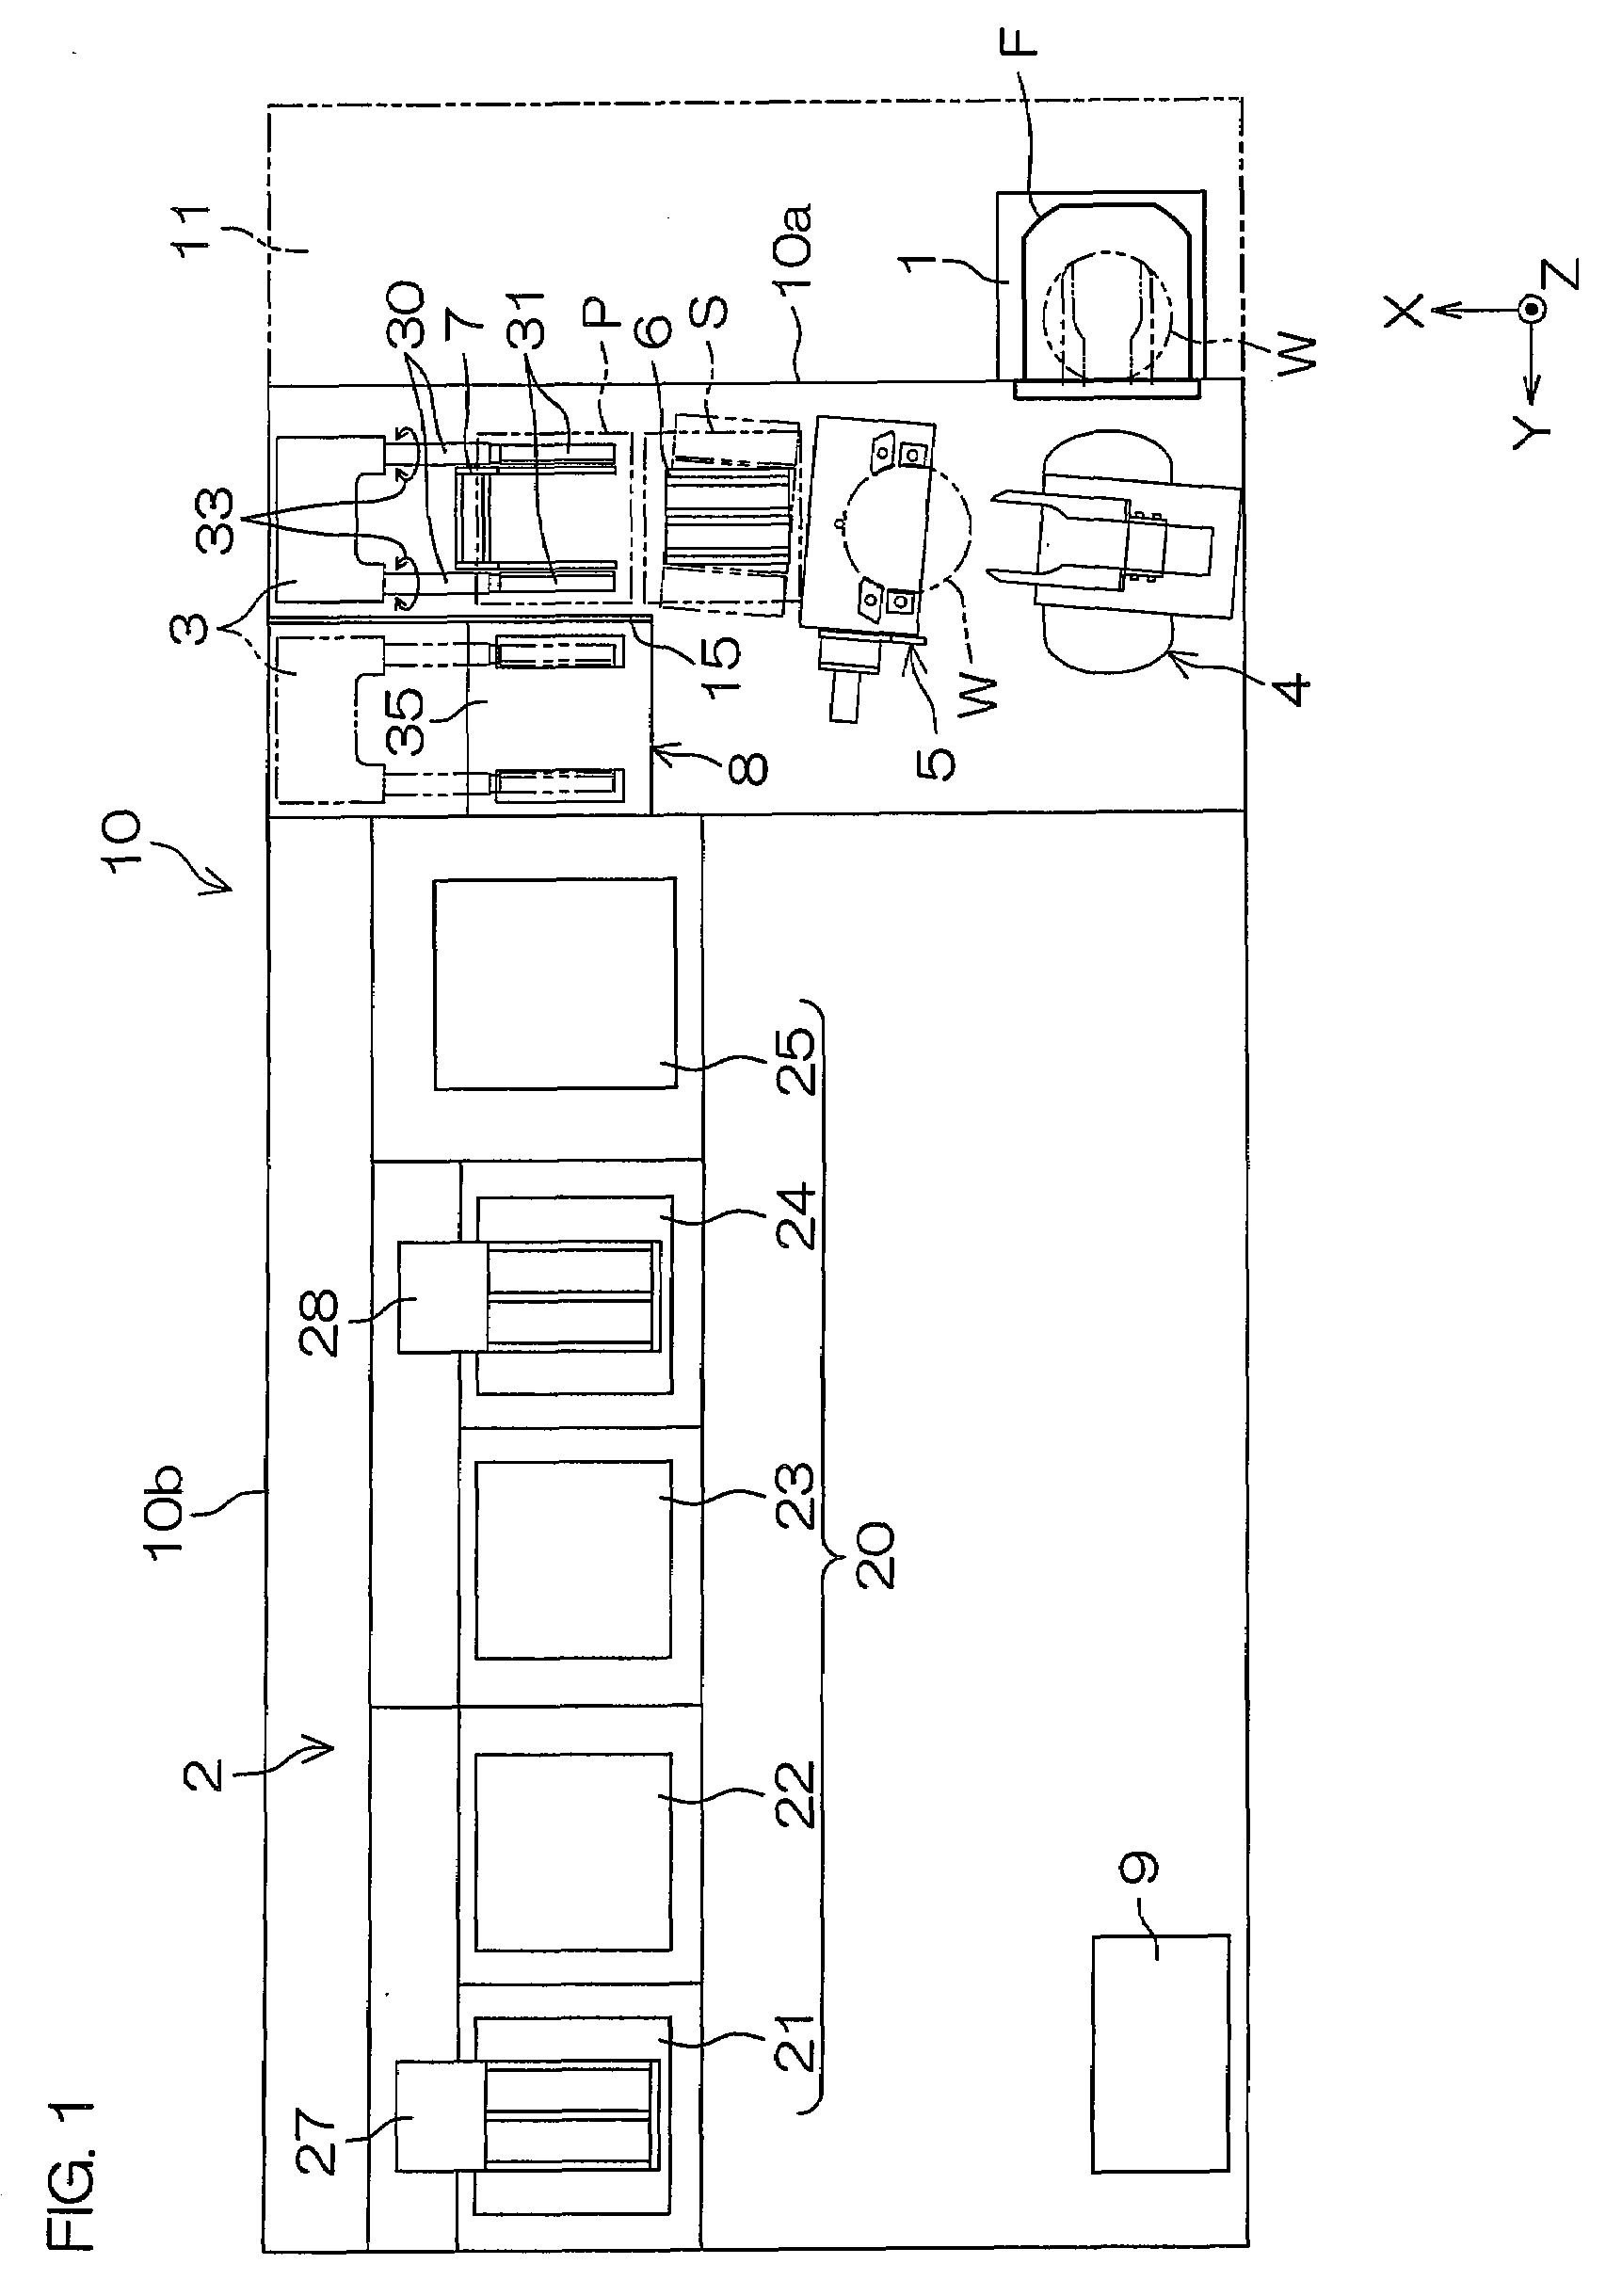 Substrate processing apparatus and substrate conveying apparatus for use in the same